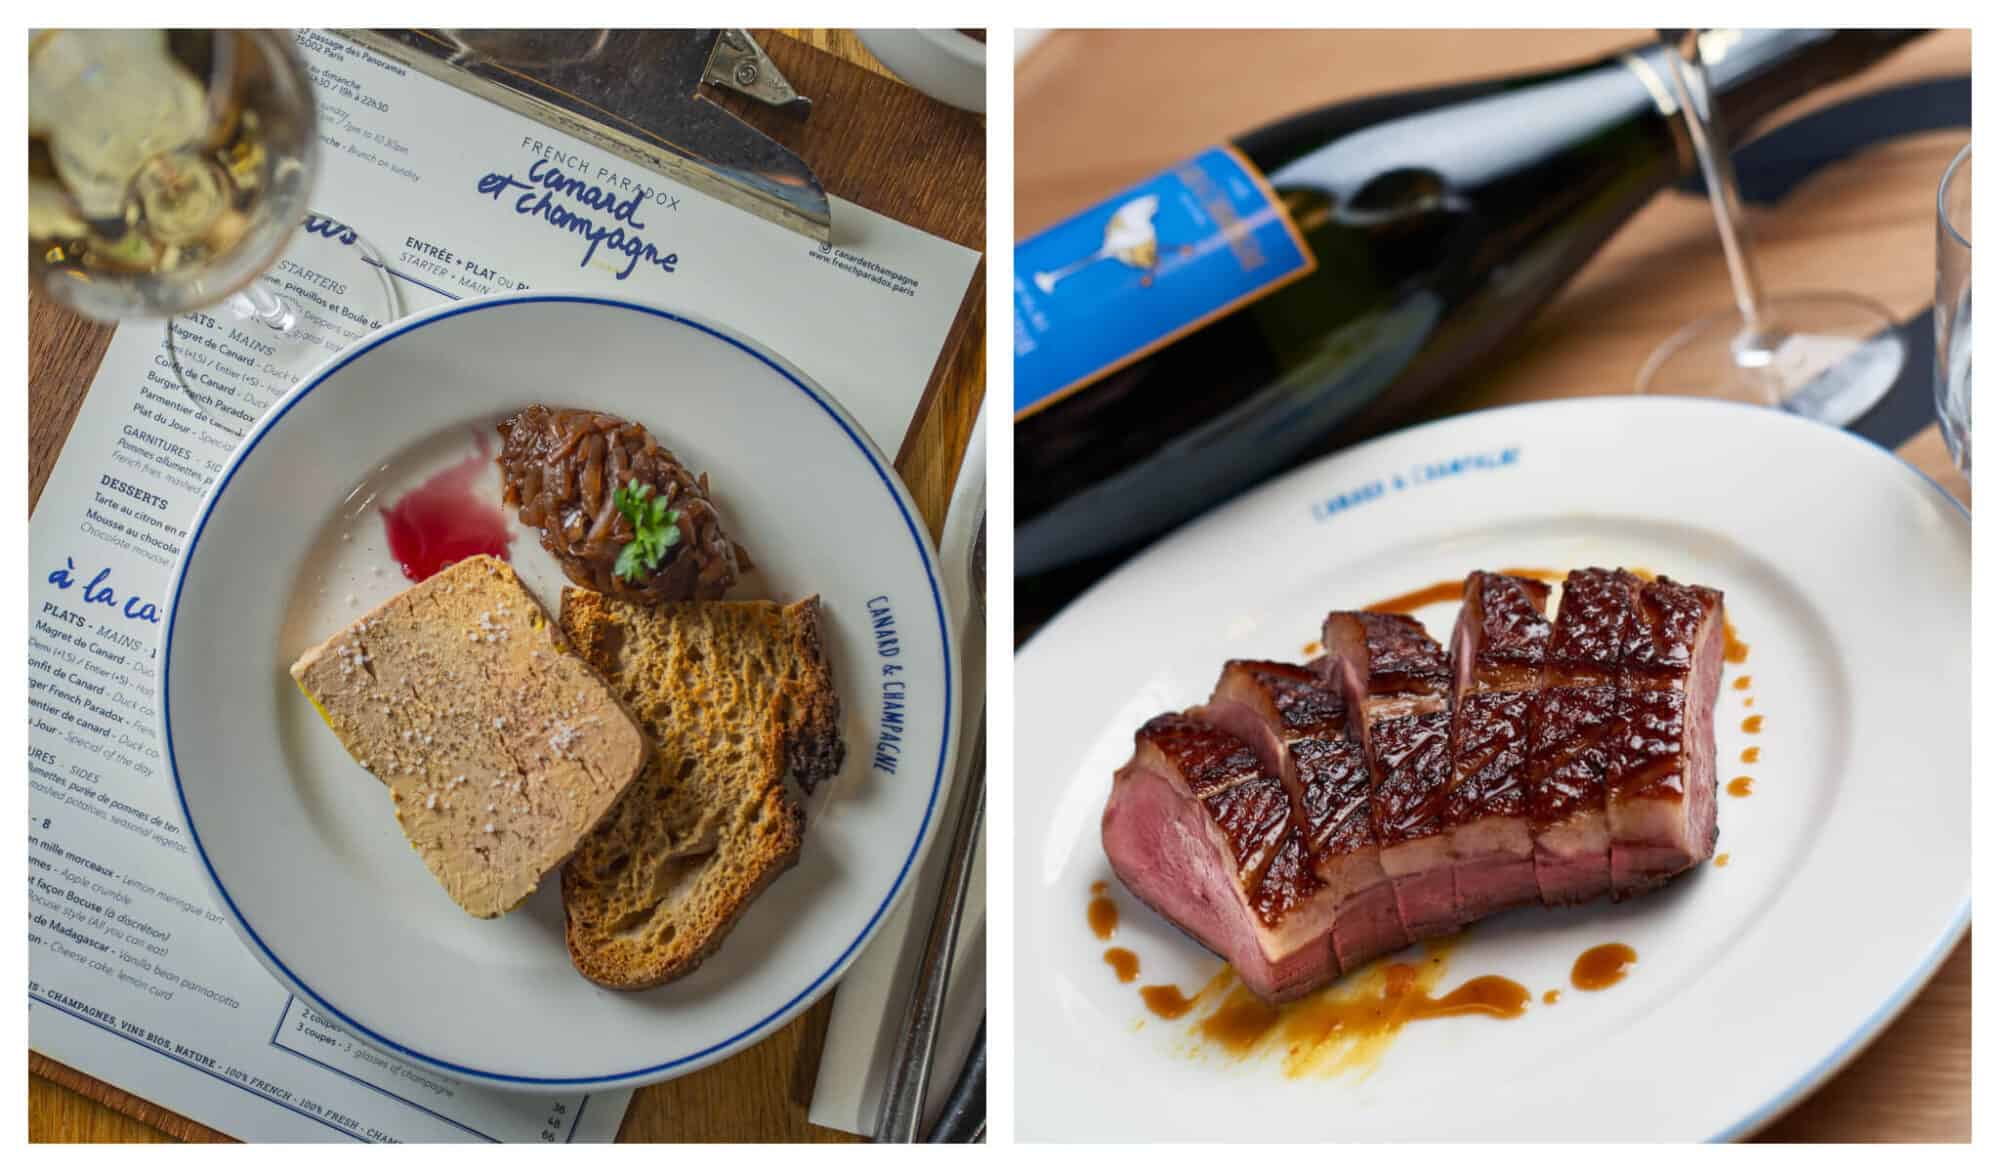 Left: An entrance plate of foie gras, bread, and champagne. Right: A plate of roasted meat drizzled with brown sauce.